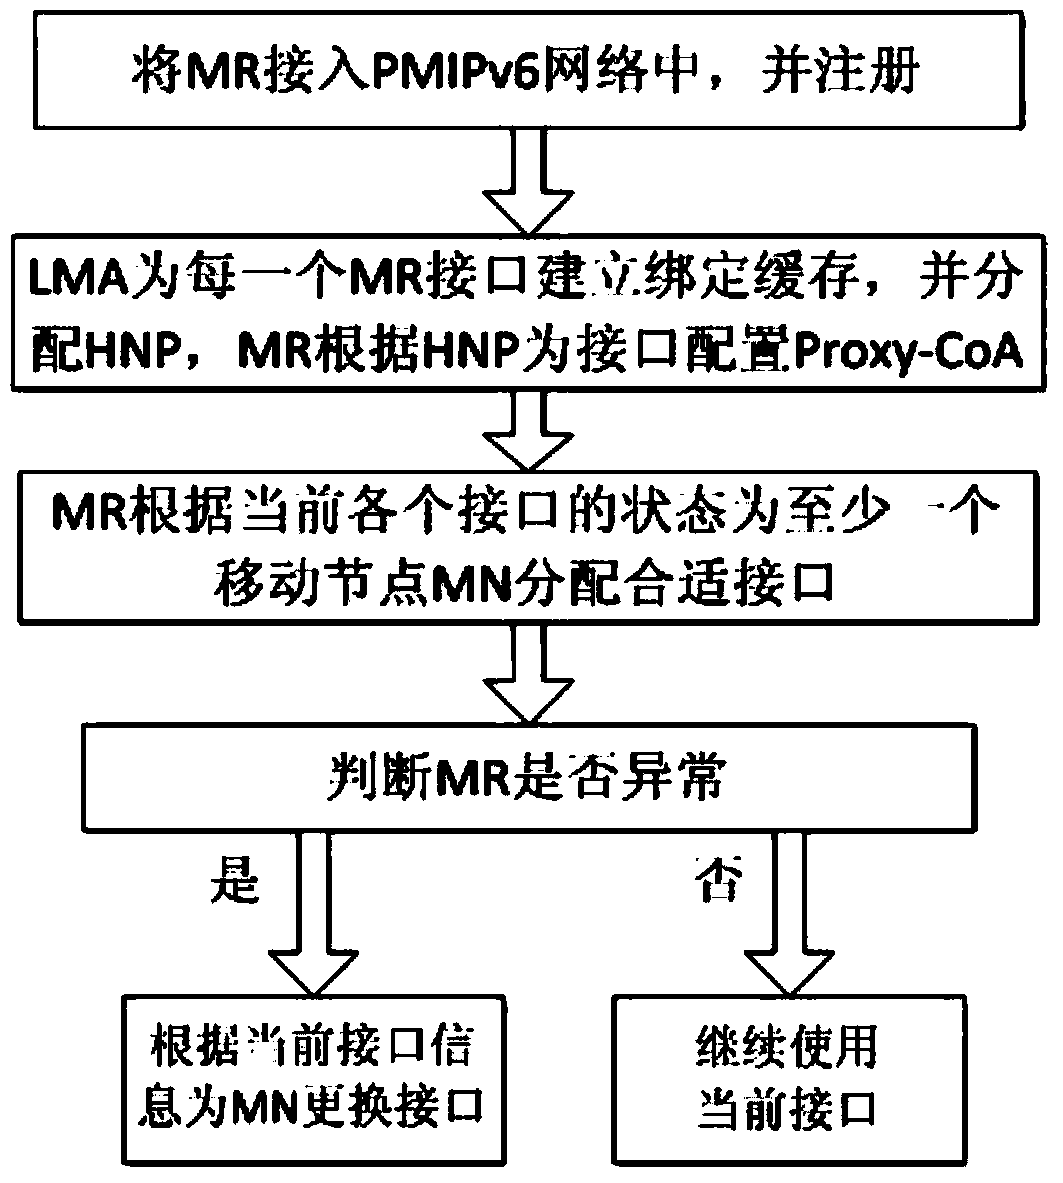 Network mobility multi-interface access implementation method and system based on N-PMIPv6